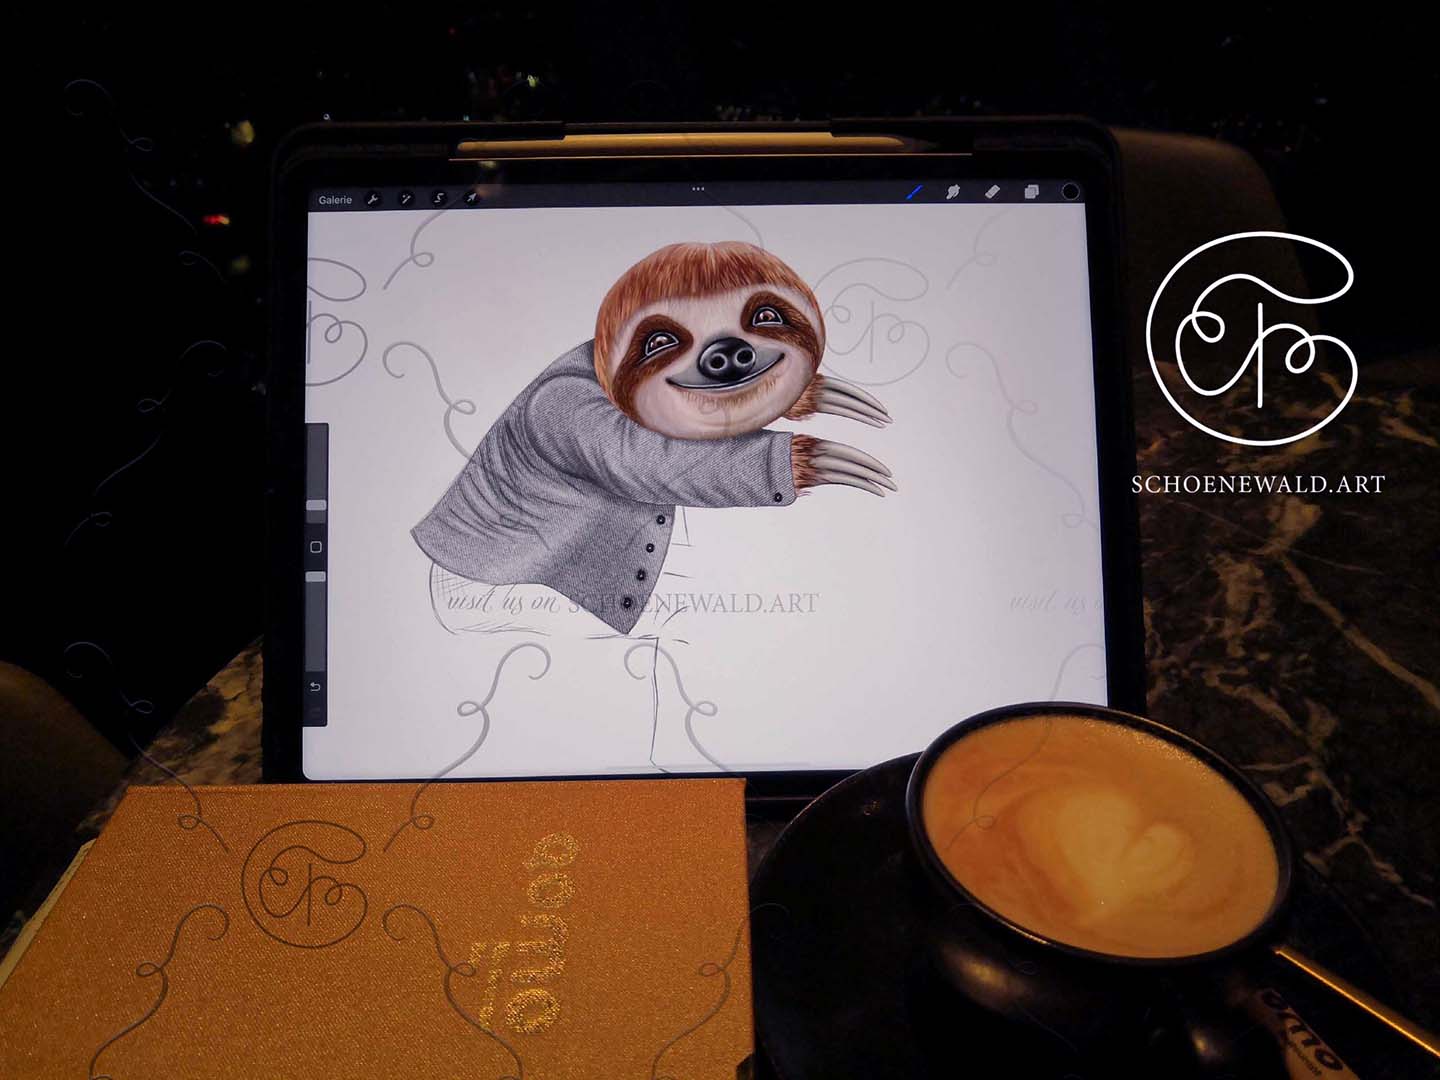 iPad showing a cute sloth from slothtee.de in the restaurant Qomo in Rhein Tower Duesseldorf, where the sloth was painted